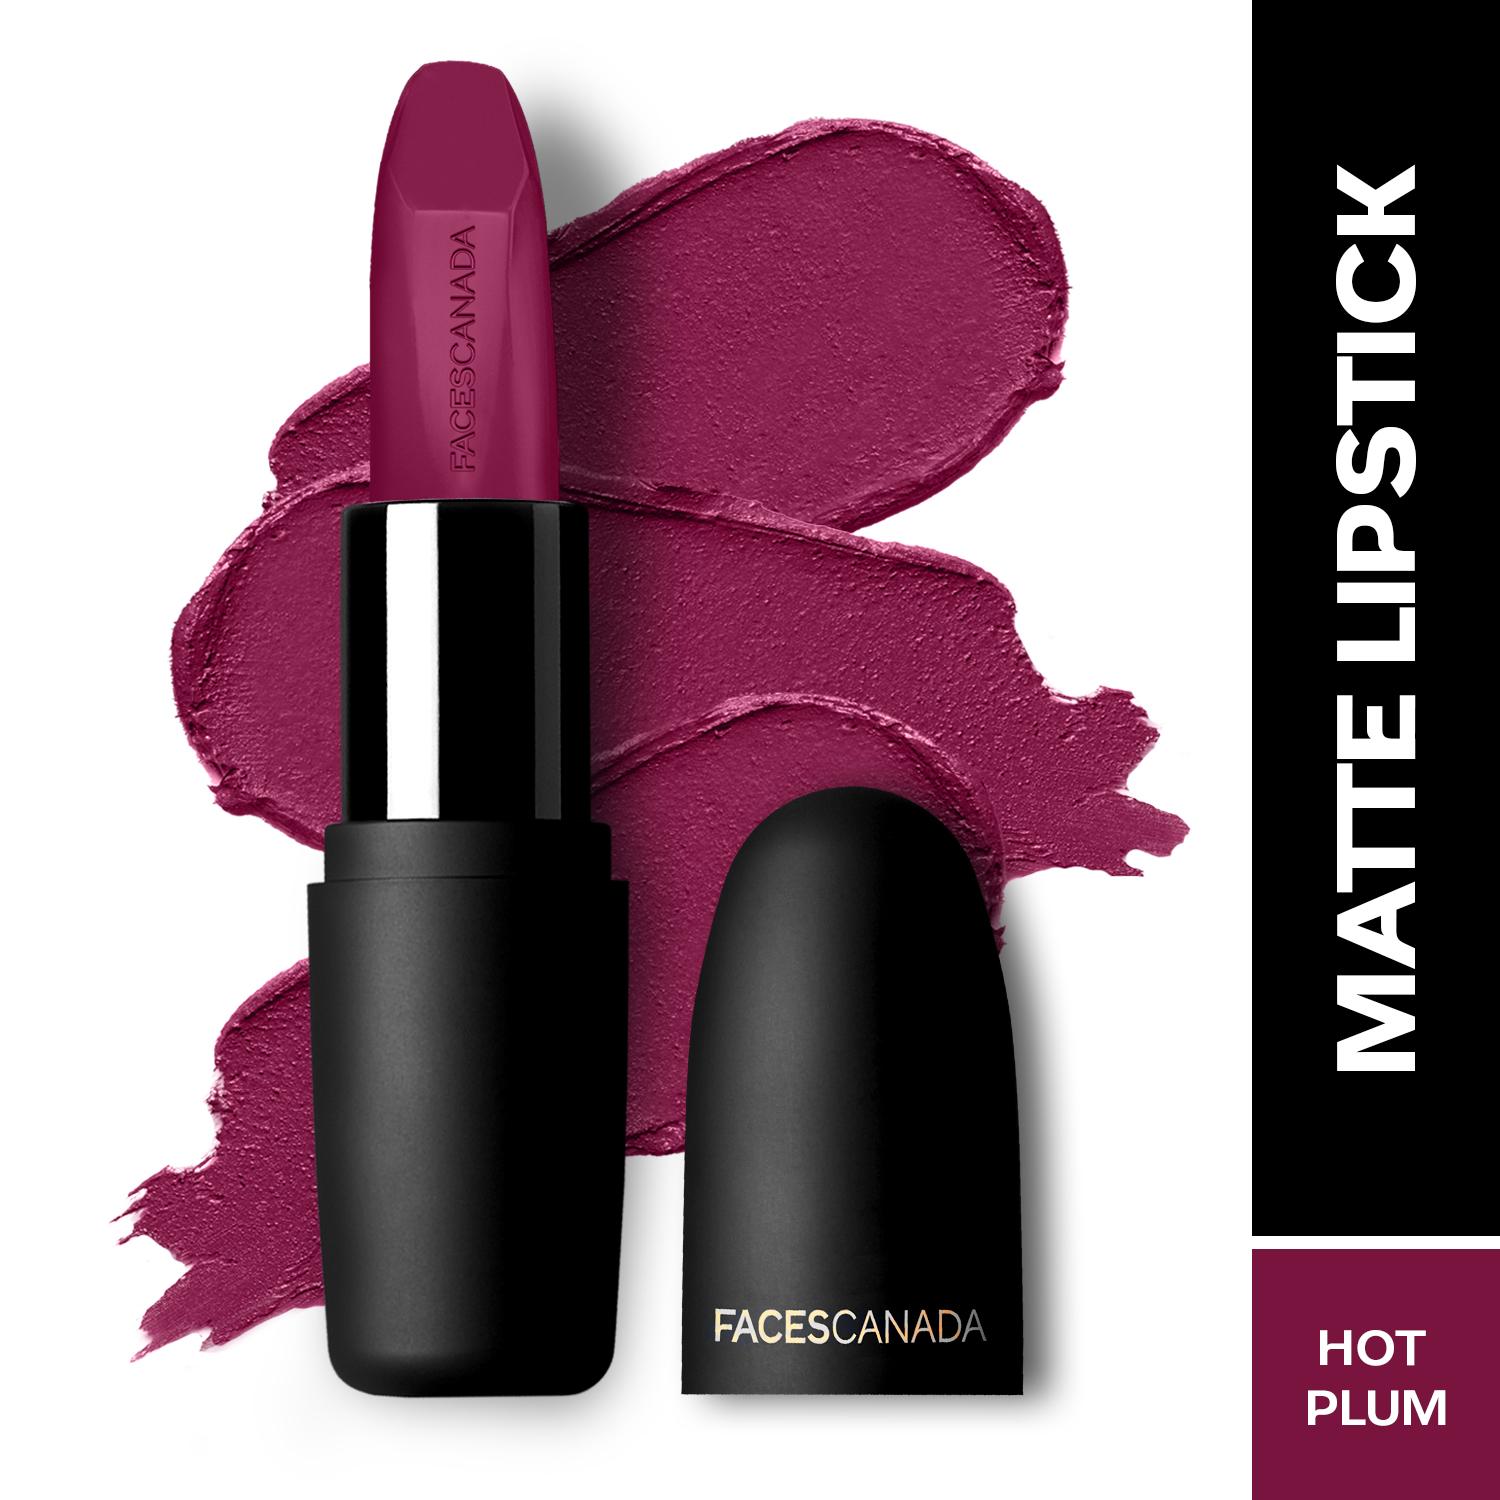 Faces Canada | Faces Canada Weightless Matte Lipstick, Pigmented and Hydrated Lips - Hot Plum 24 (4.5 g)